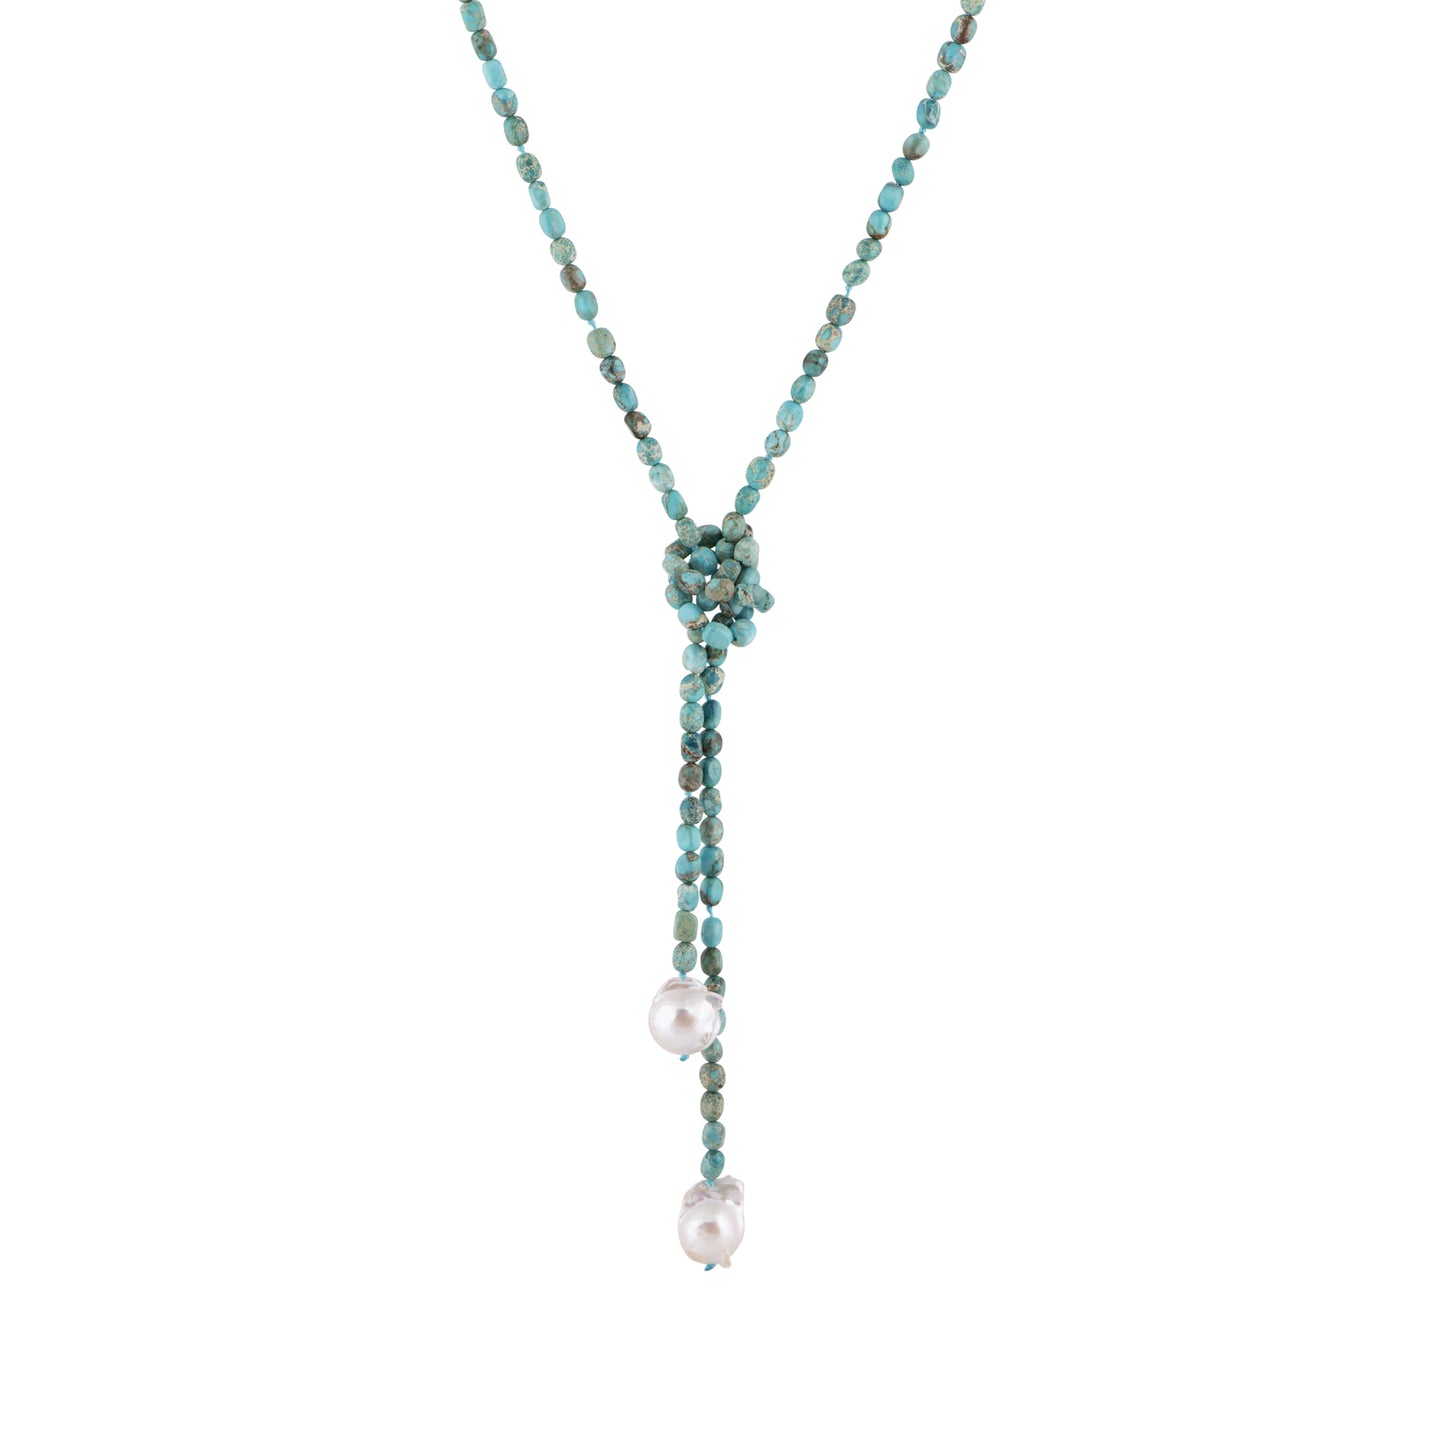 Laurie - Turquoise baroque pearl lariat necklace (Tied)